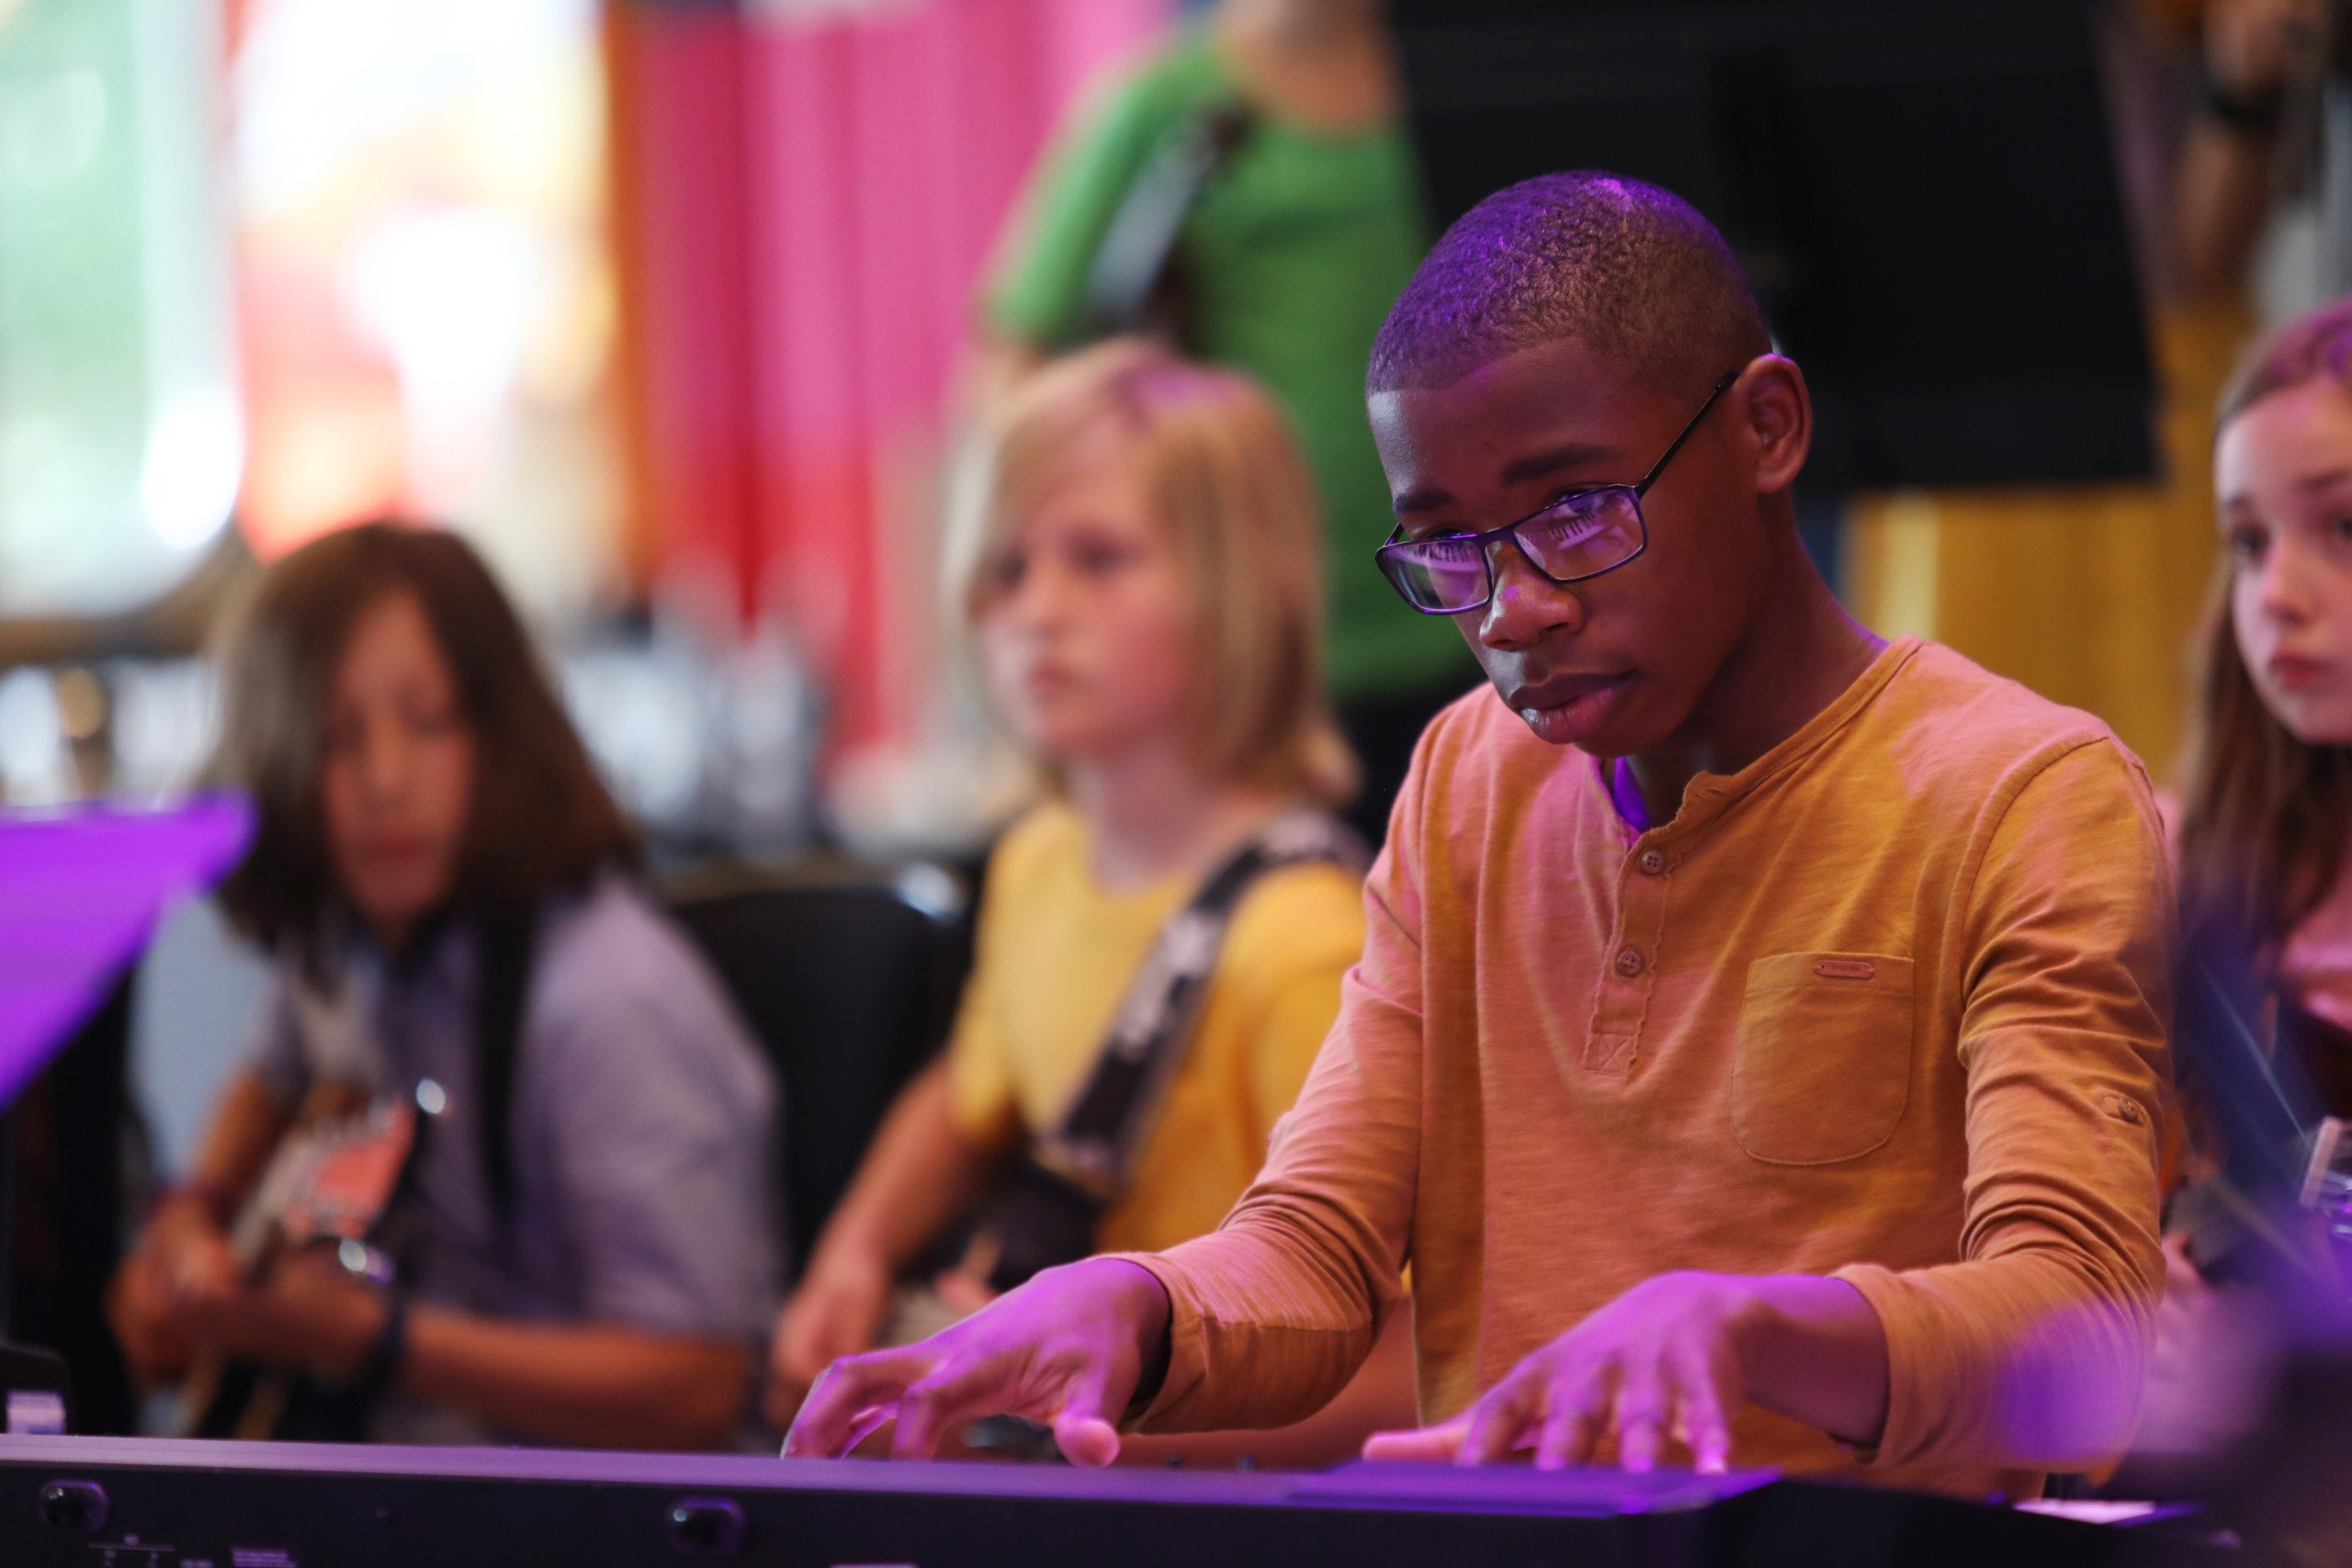 A young person playing the keyboard